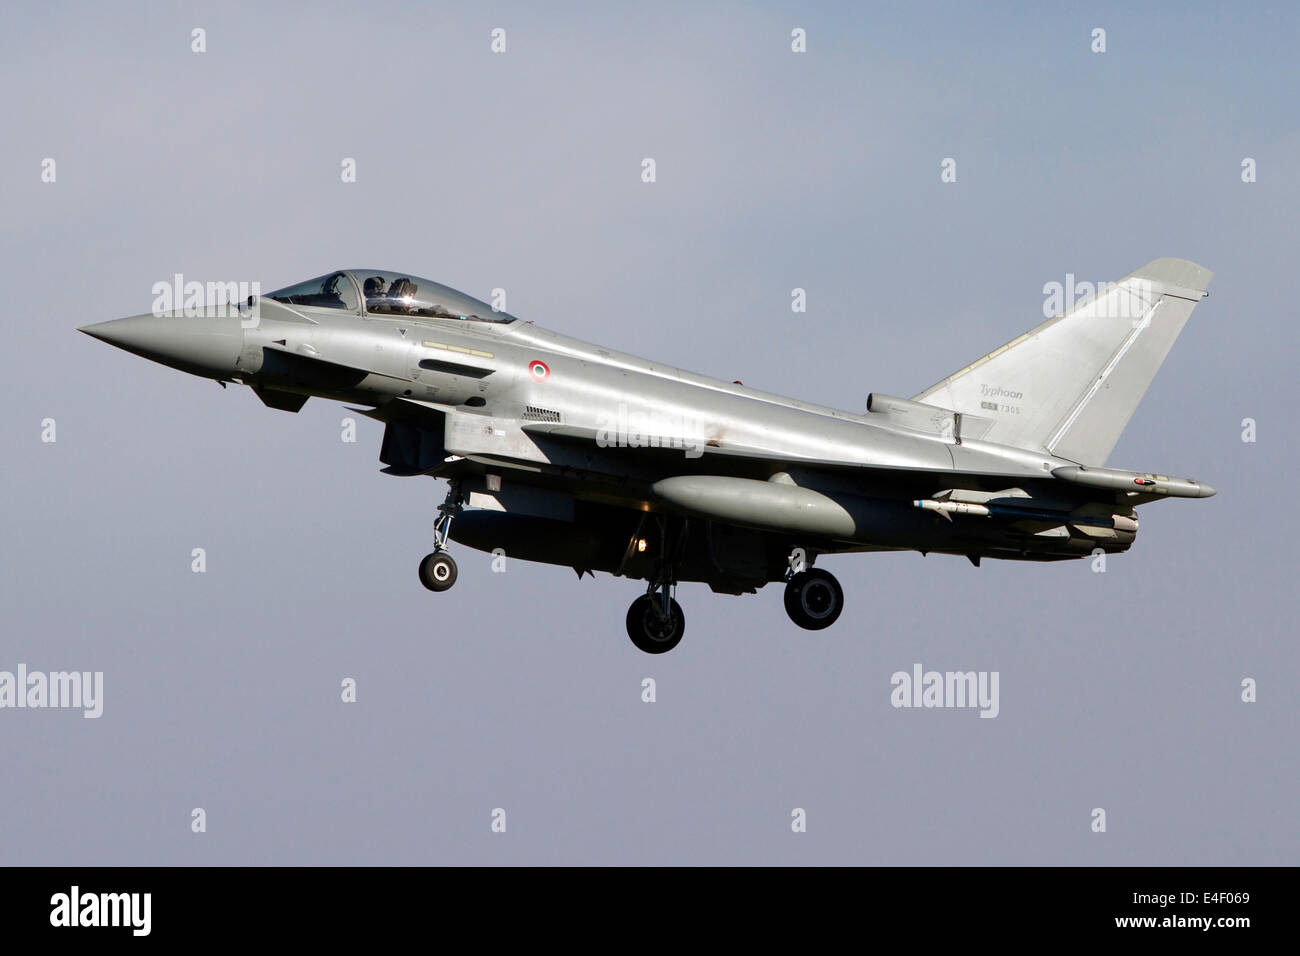 A Eurofighter Typhoon 2000 multirole fighter aircraft of the Italian Air Force in flight over Italy. Stock Photo